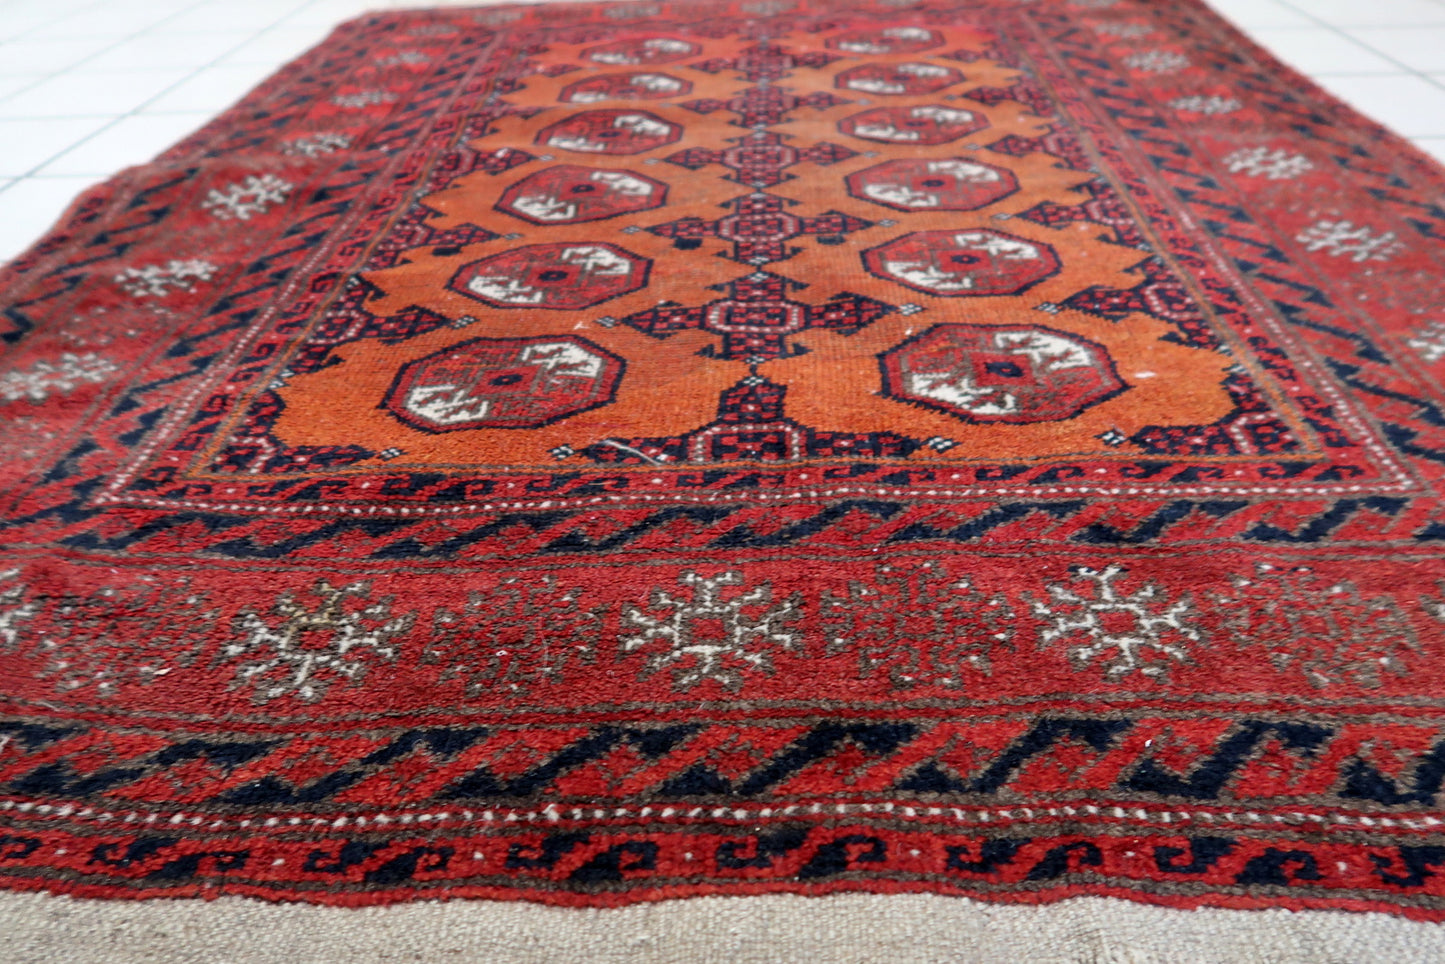 Close-up of traditional motifs on Handmade Antique Afghan Baluch Rug - Detailed view highlighting the traditional motifs, including diamonds and stars.